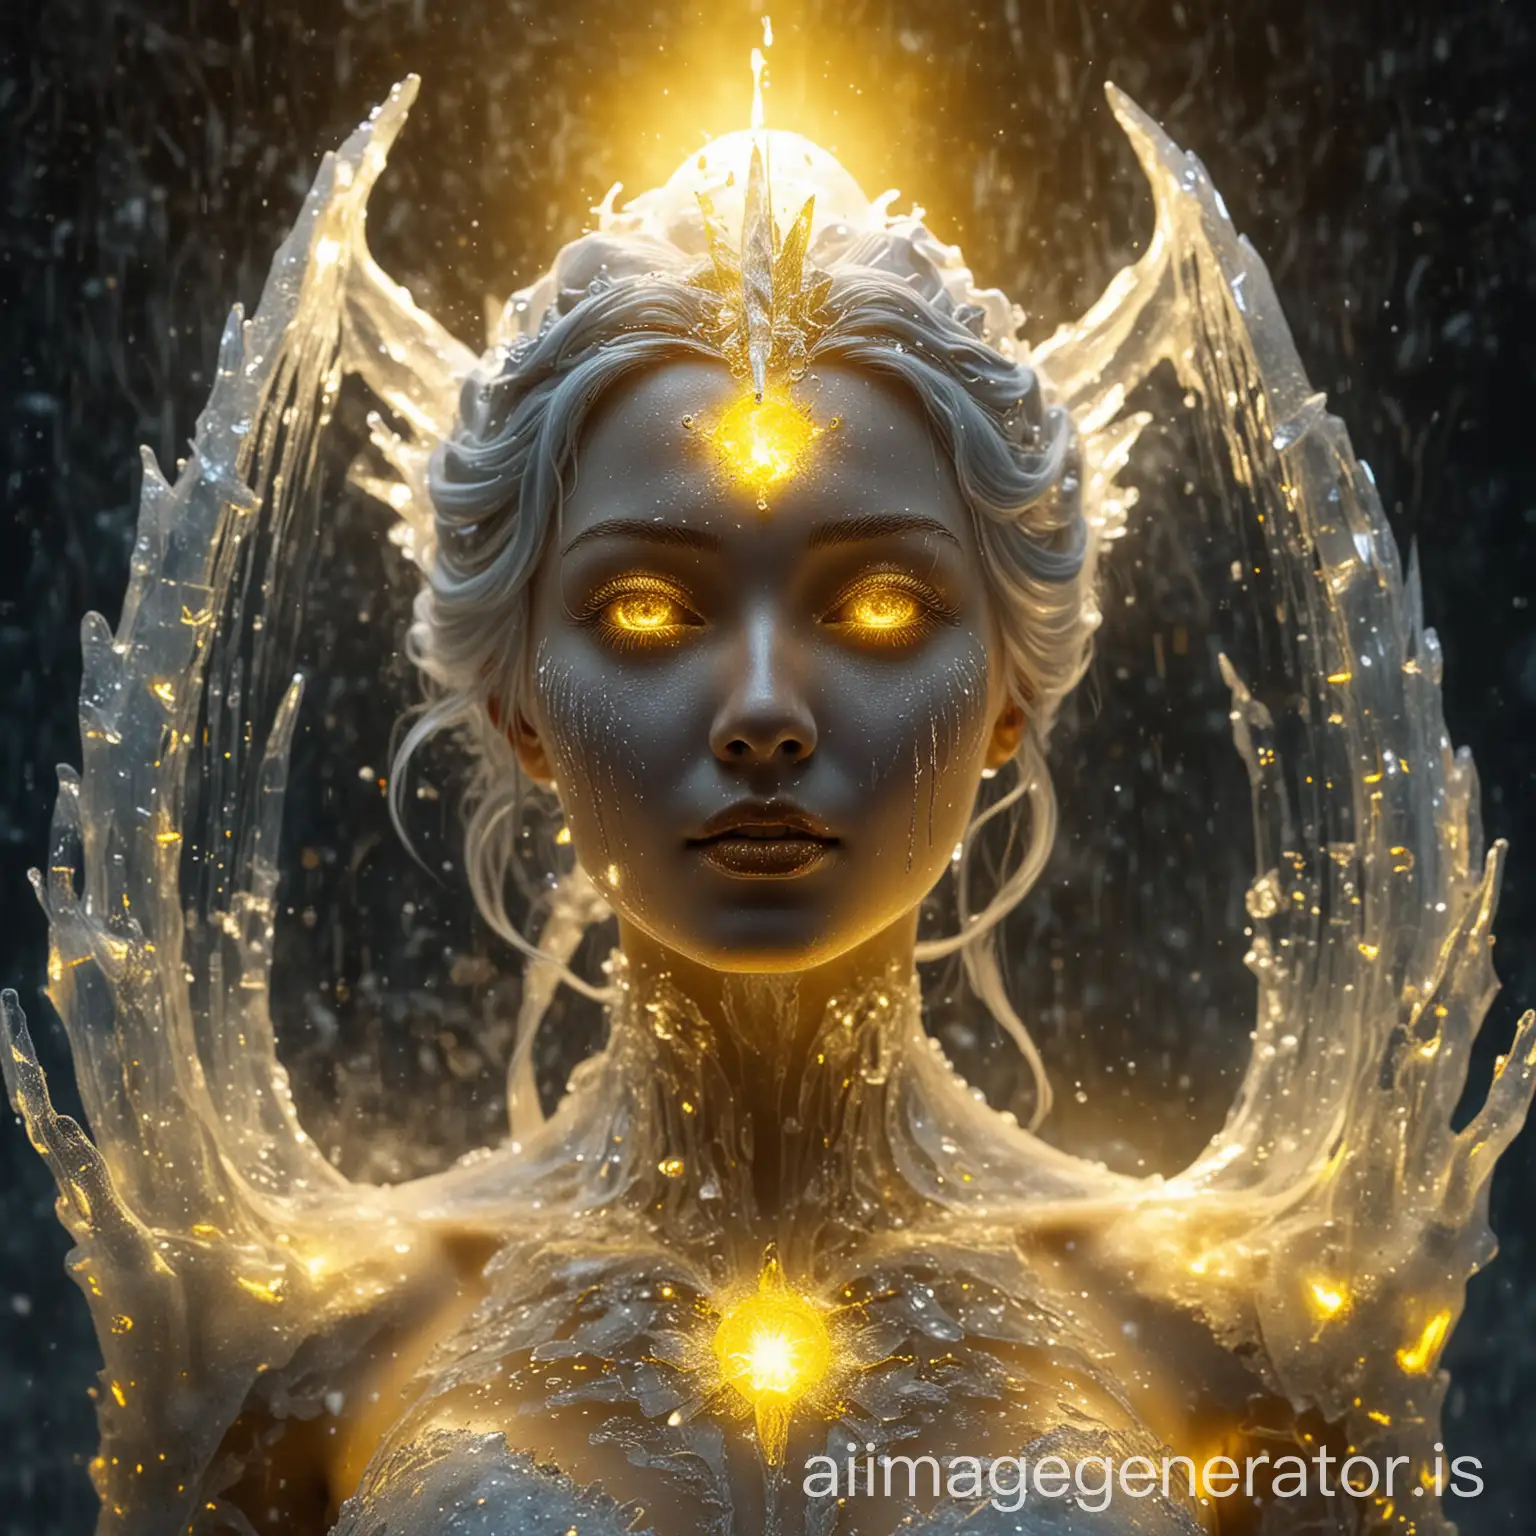 magical ice  goddess scupultures with yellow light coming from within